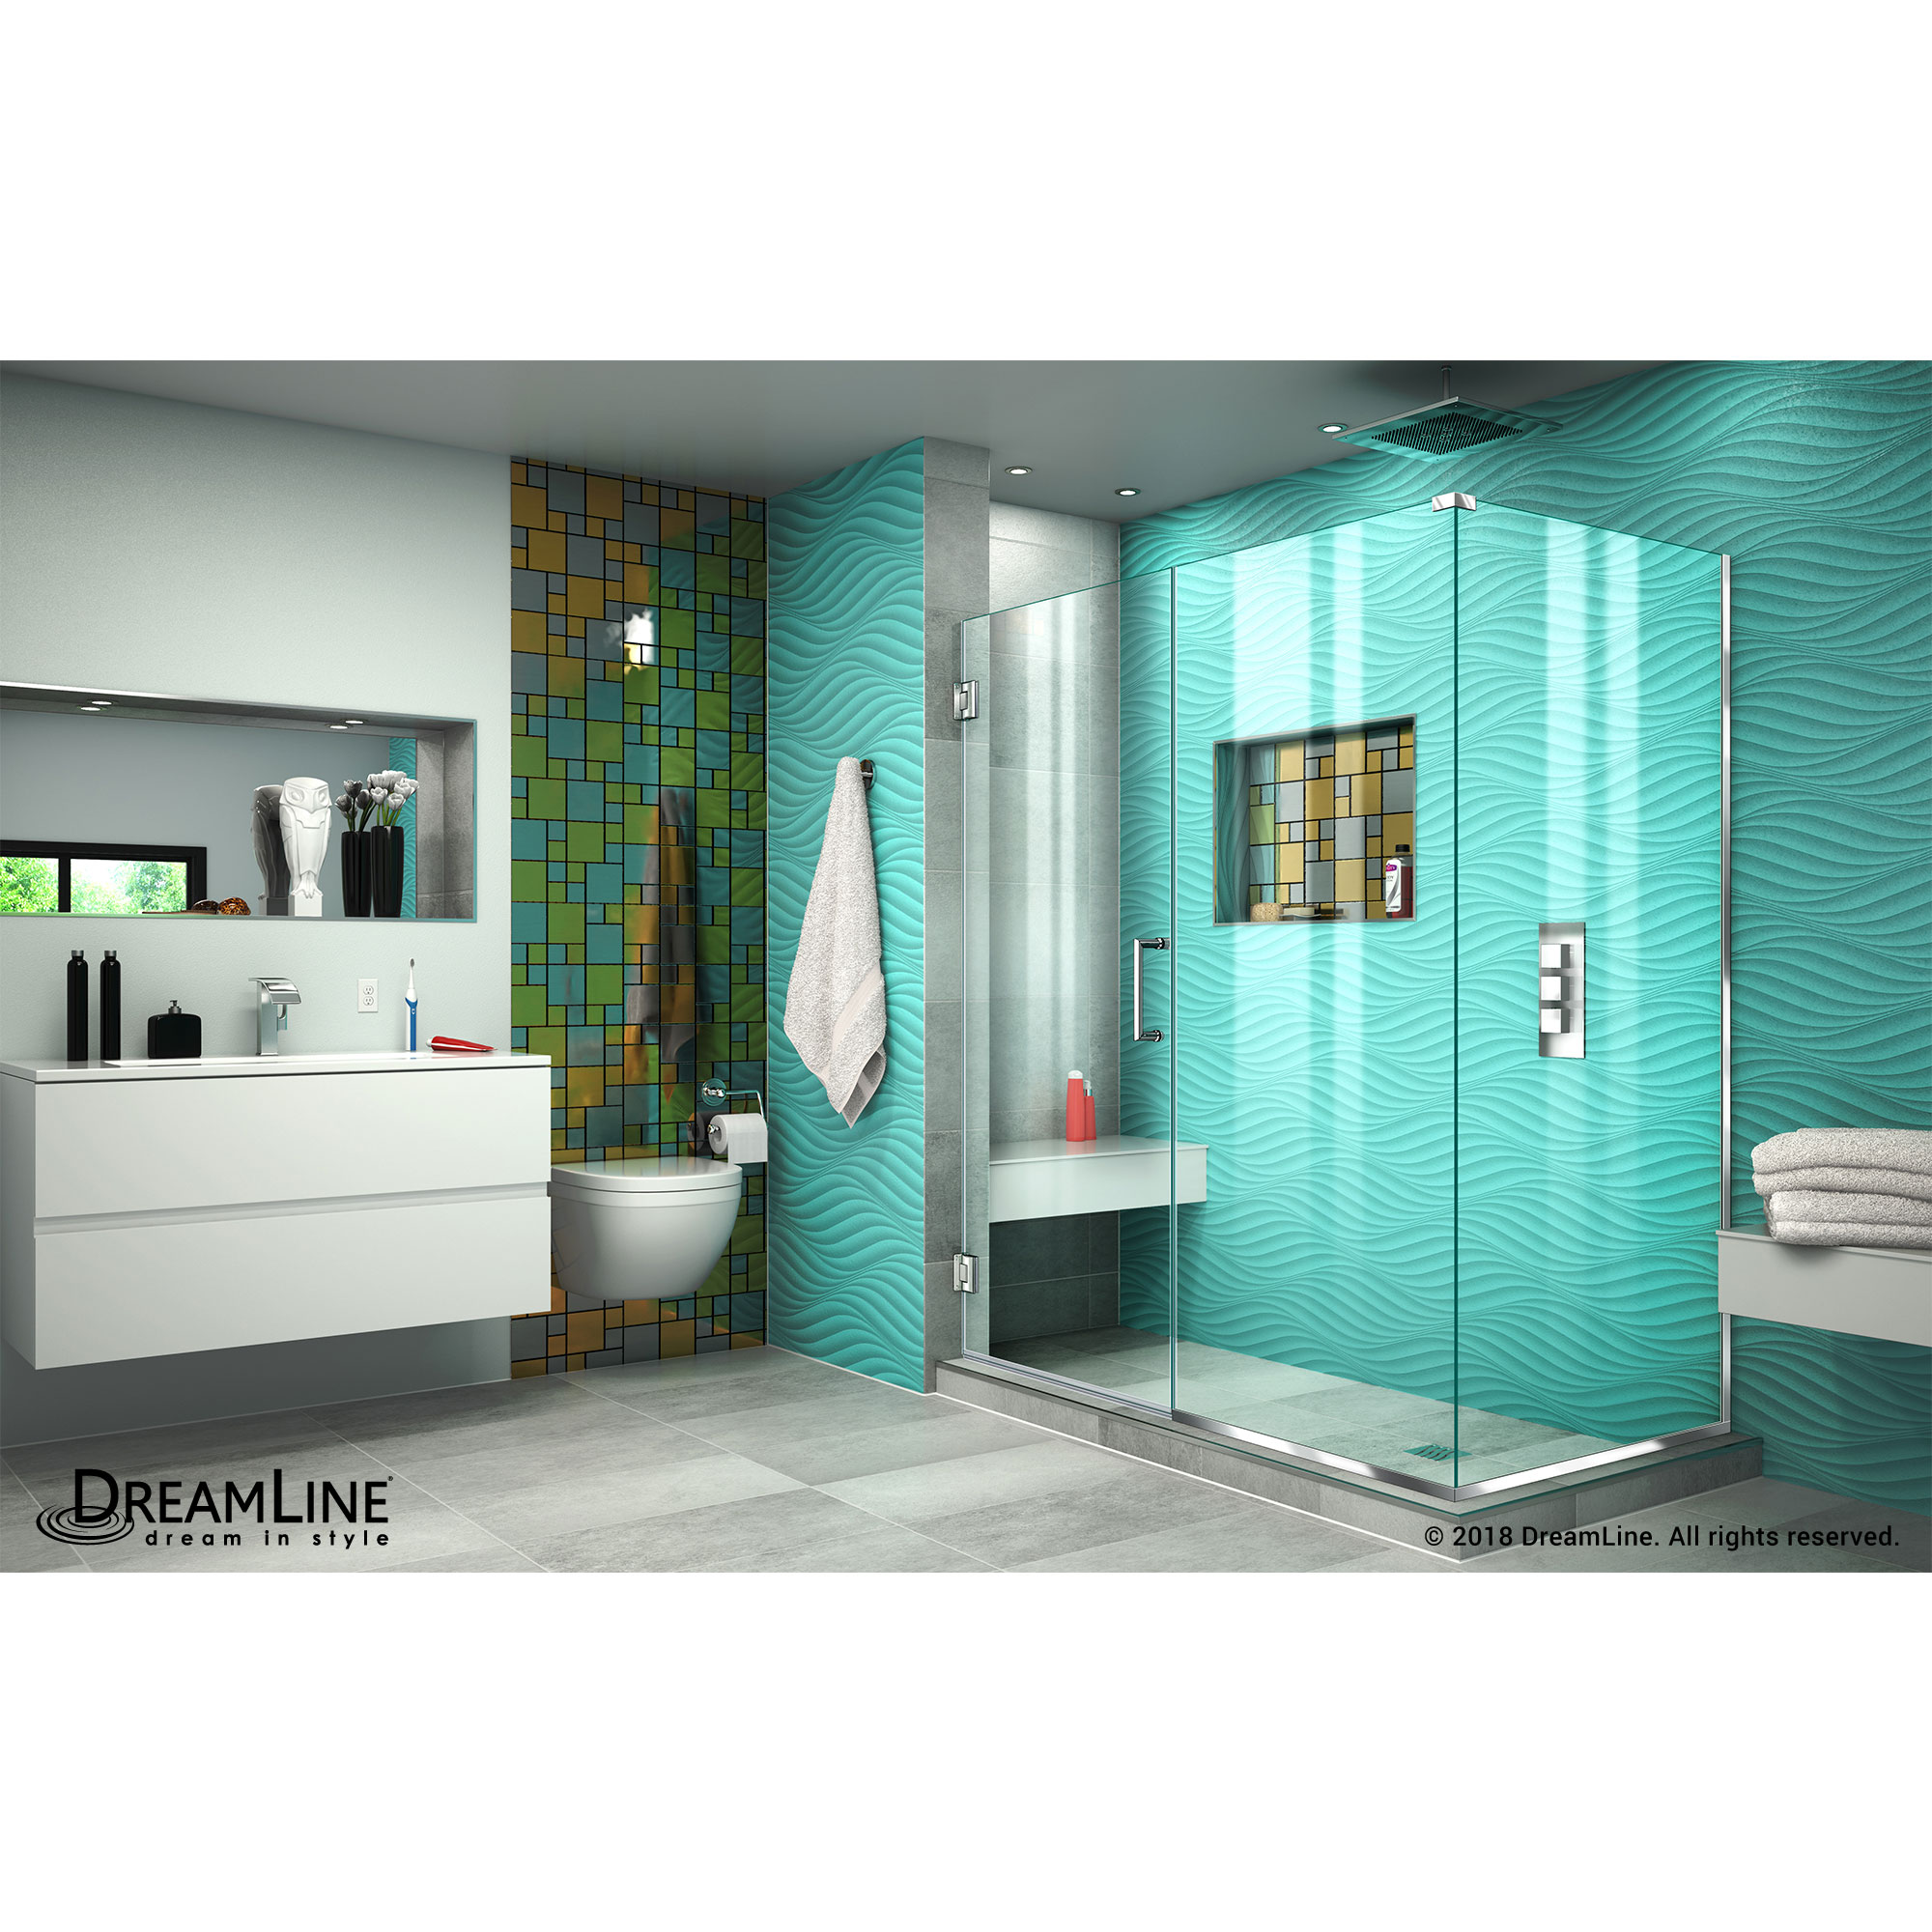 DreamLine Unidoor Plus 57 in. W x 34 3/8 in. D x 72 in. H Frameless Hinged Shower Enclosure, Clear Glass, Chrome